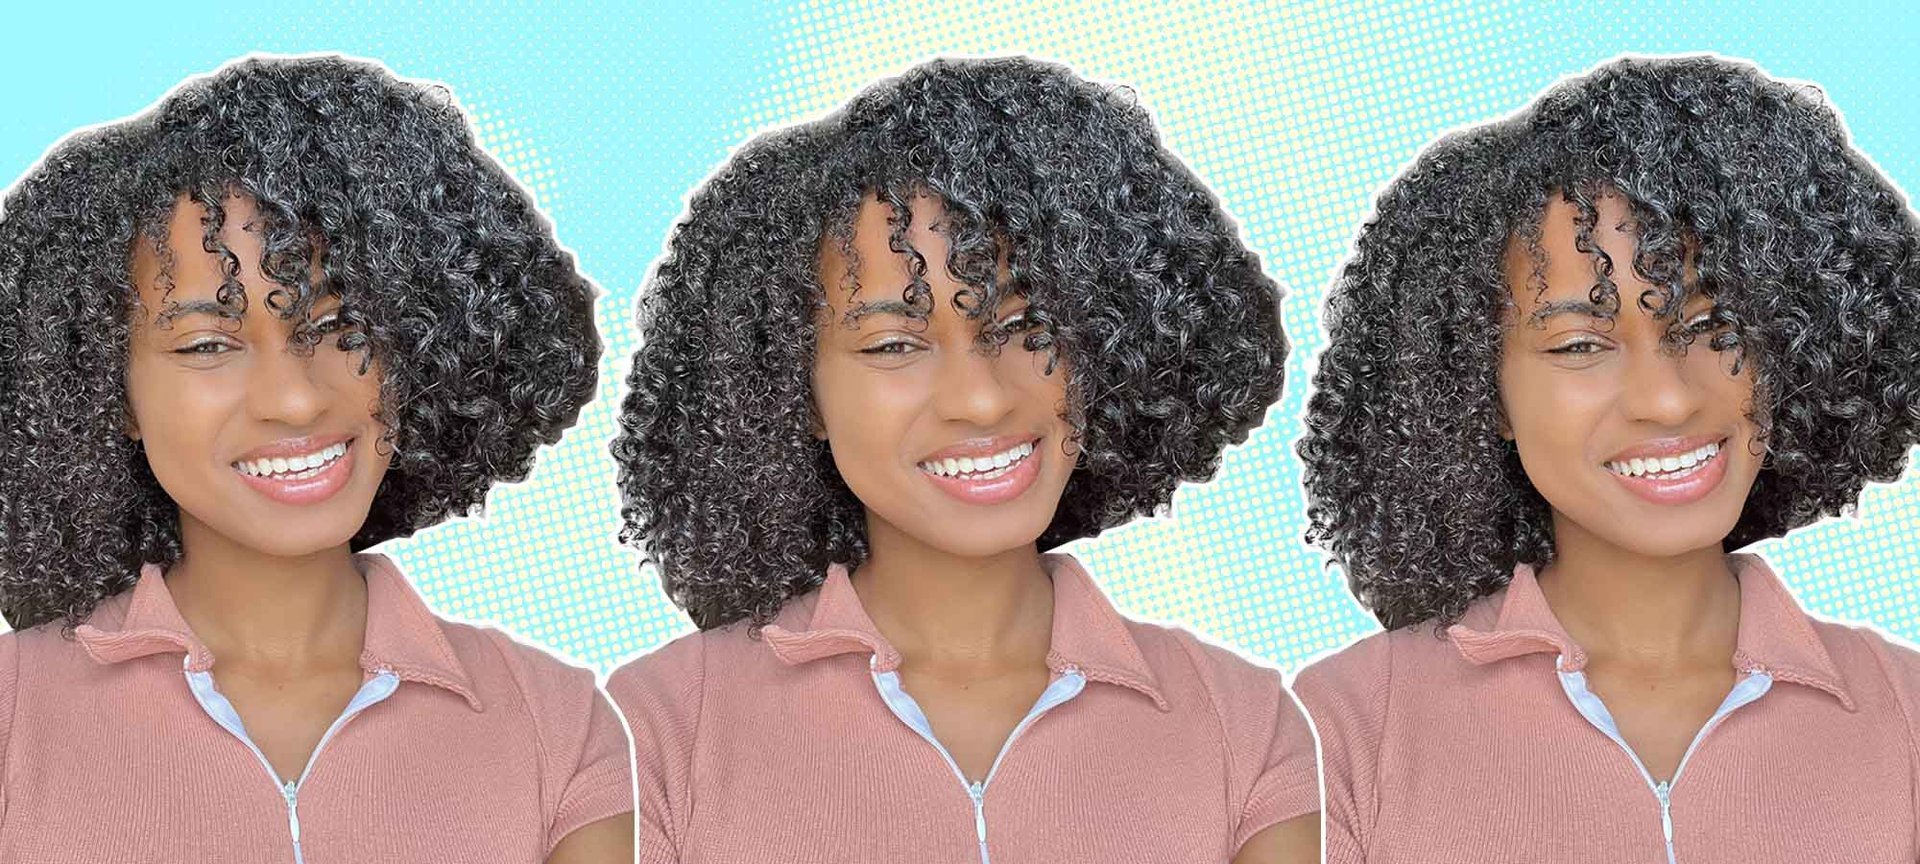 How to Treat and Prevent Matted Hair